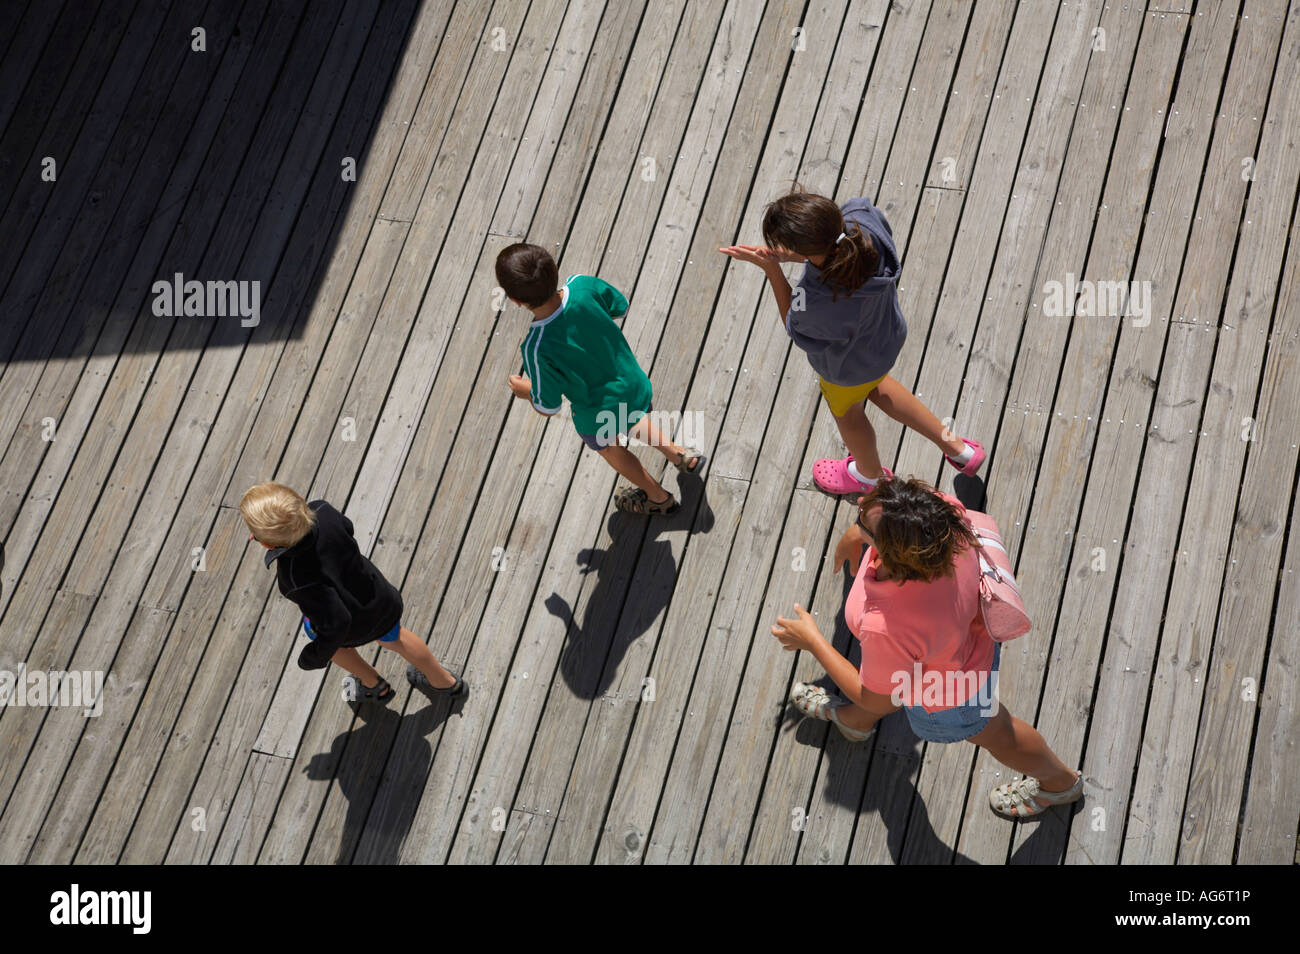 People walking on wooden dock taken from above Stock Photo